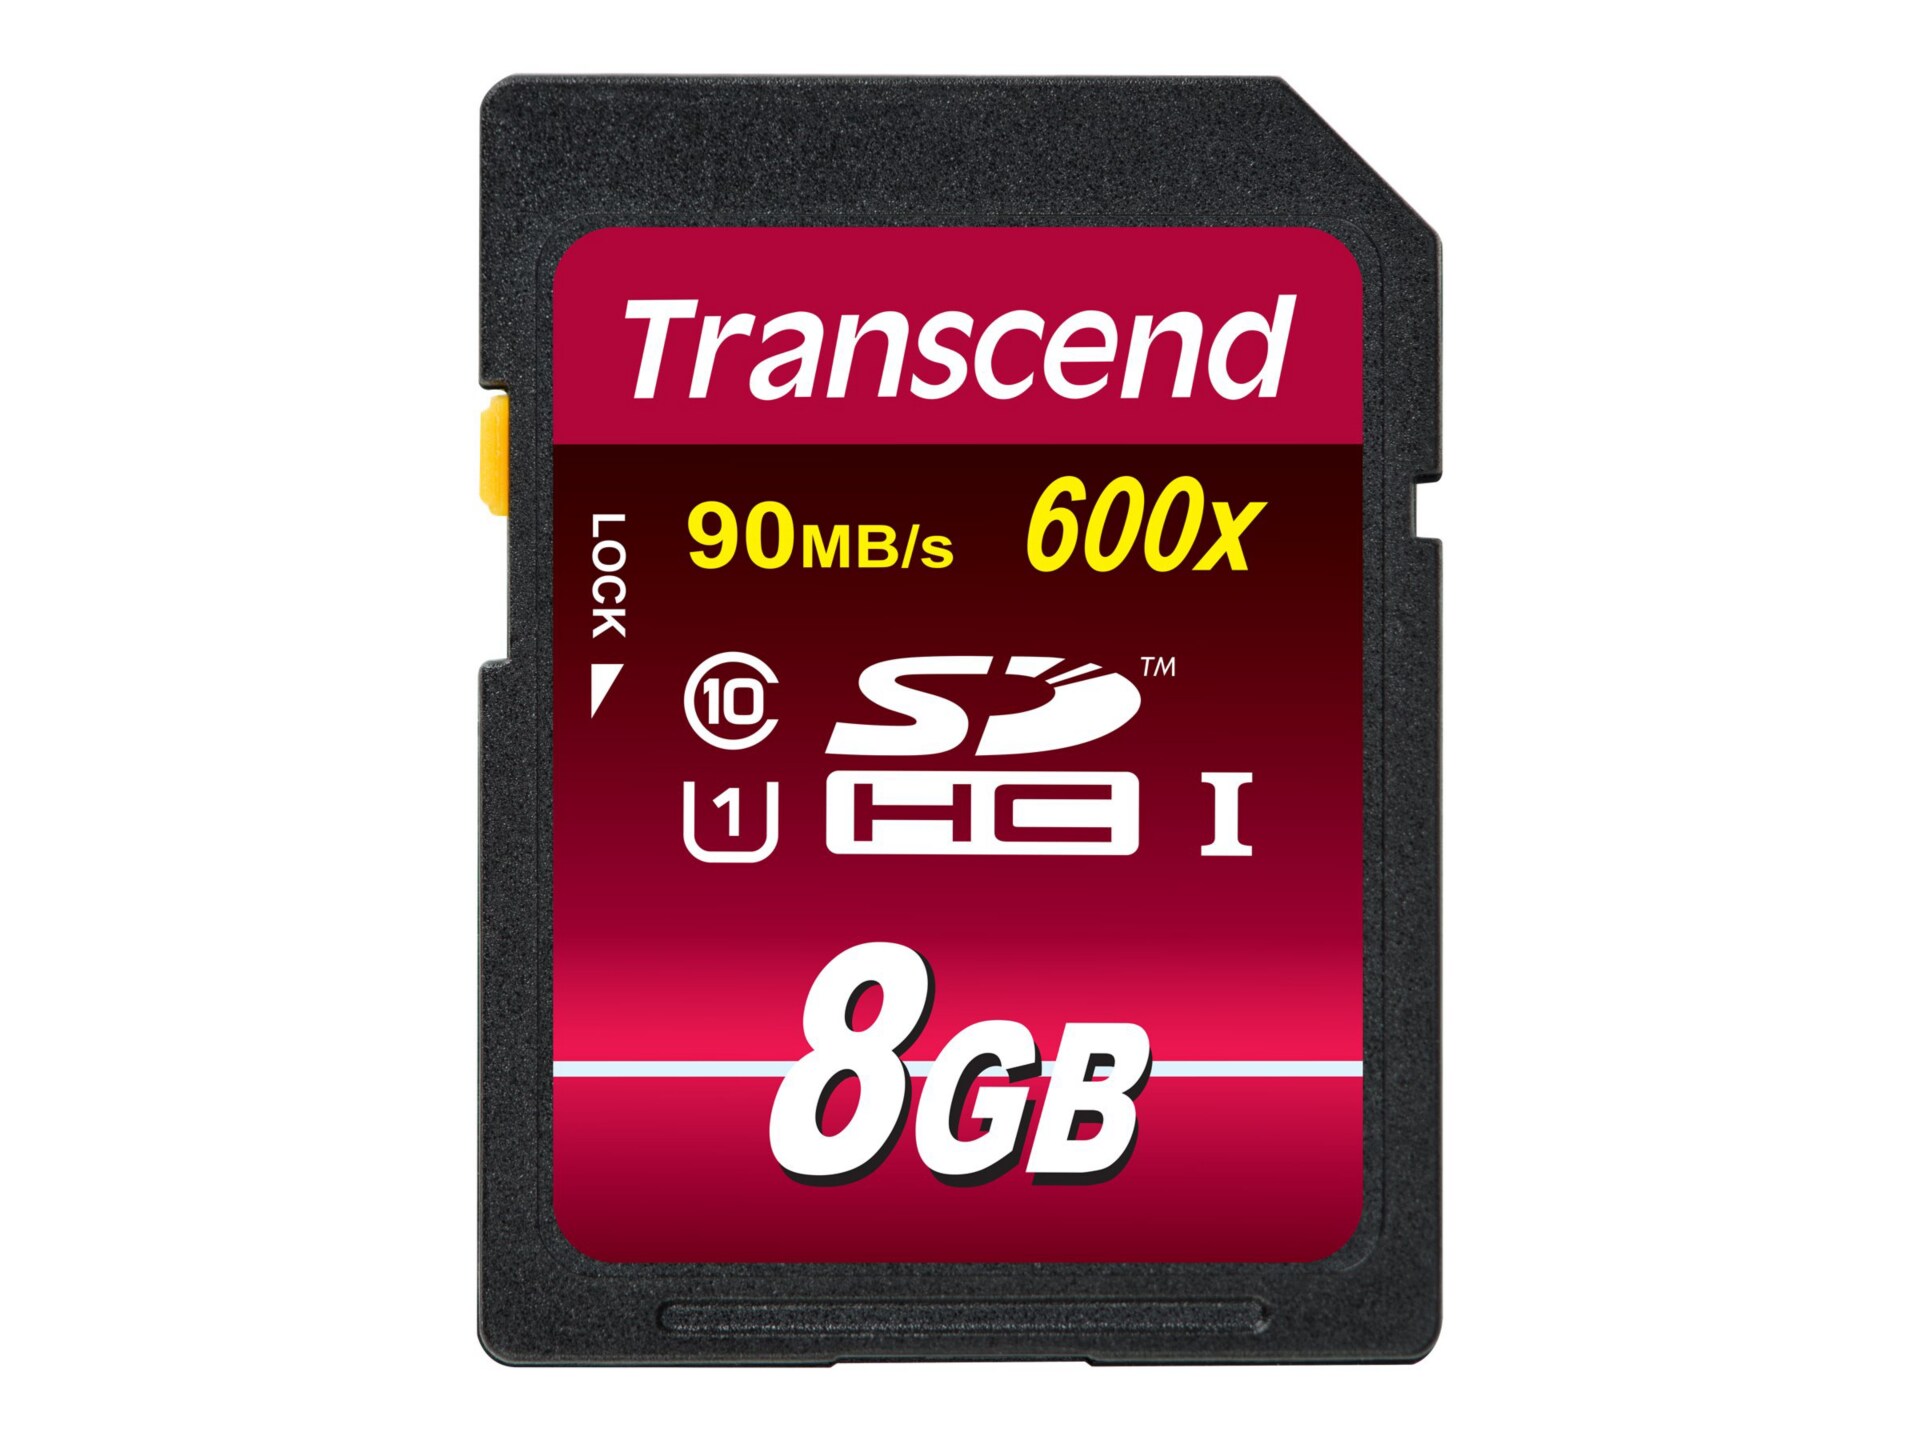 Transcend Ultimate - flash memory card - 8 GB - SDHC UHS-I